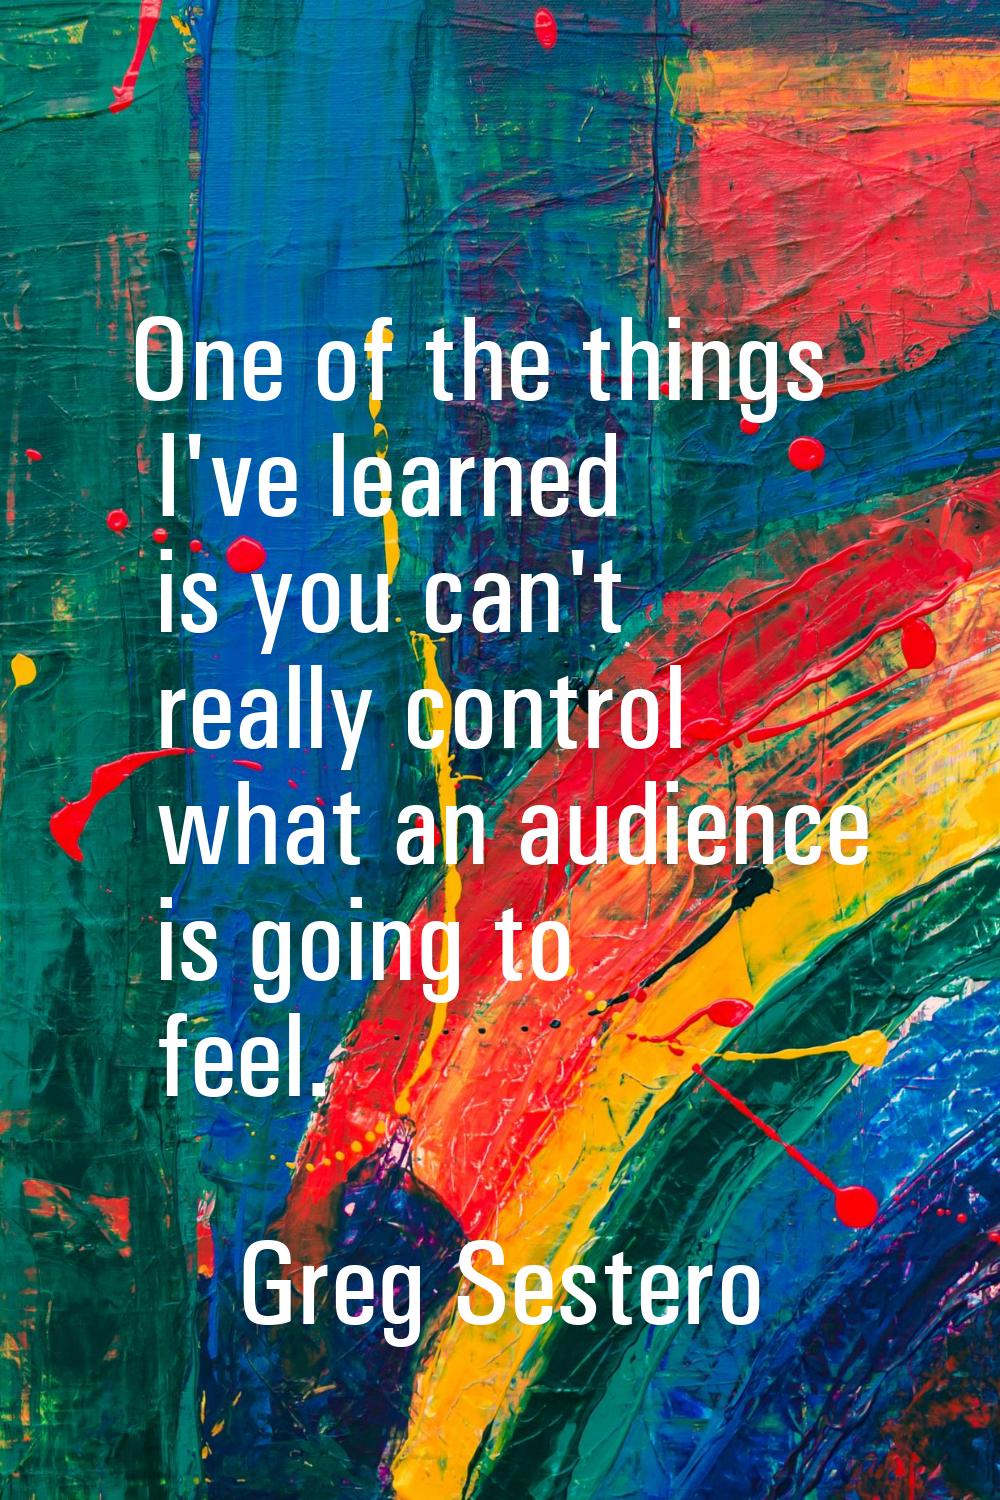 One of the things I've learned is you can't really control what an audience is going to feel.